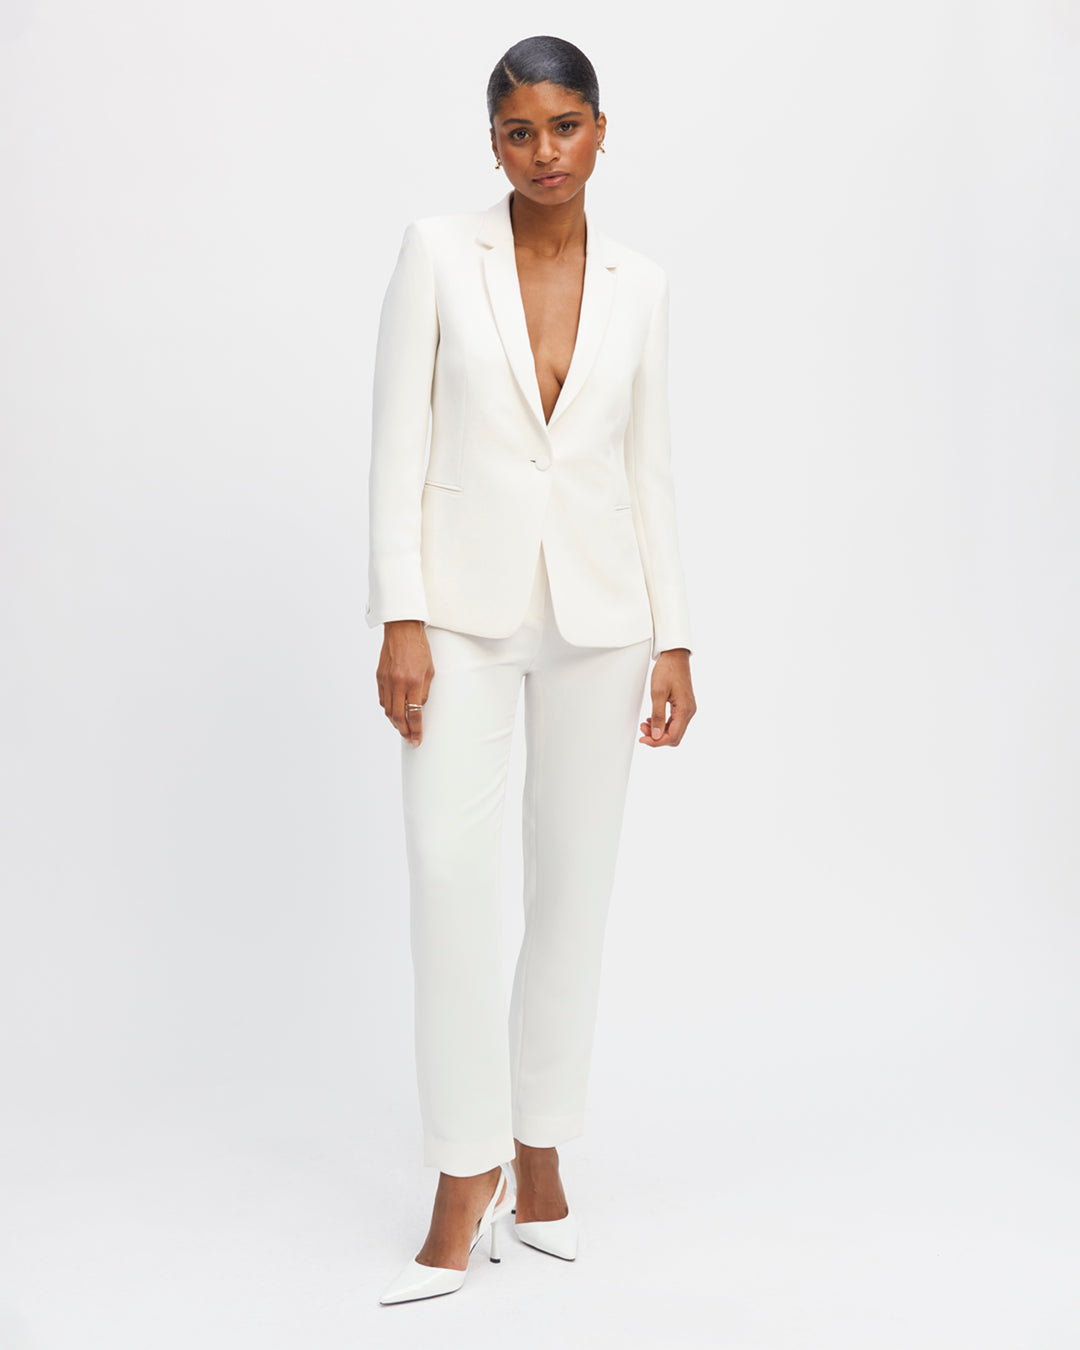 Tailor-blazer-jacket-white-knit-cut-tailor-collar-length-under-the-bottom-two-pockets-breasted-two-pockets-inside-fully-lined-button-down-sleeves-button-on-tone-17H10-tailors-for-women-paris-